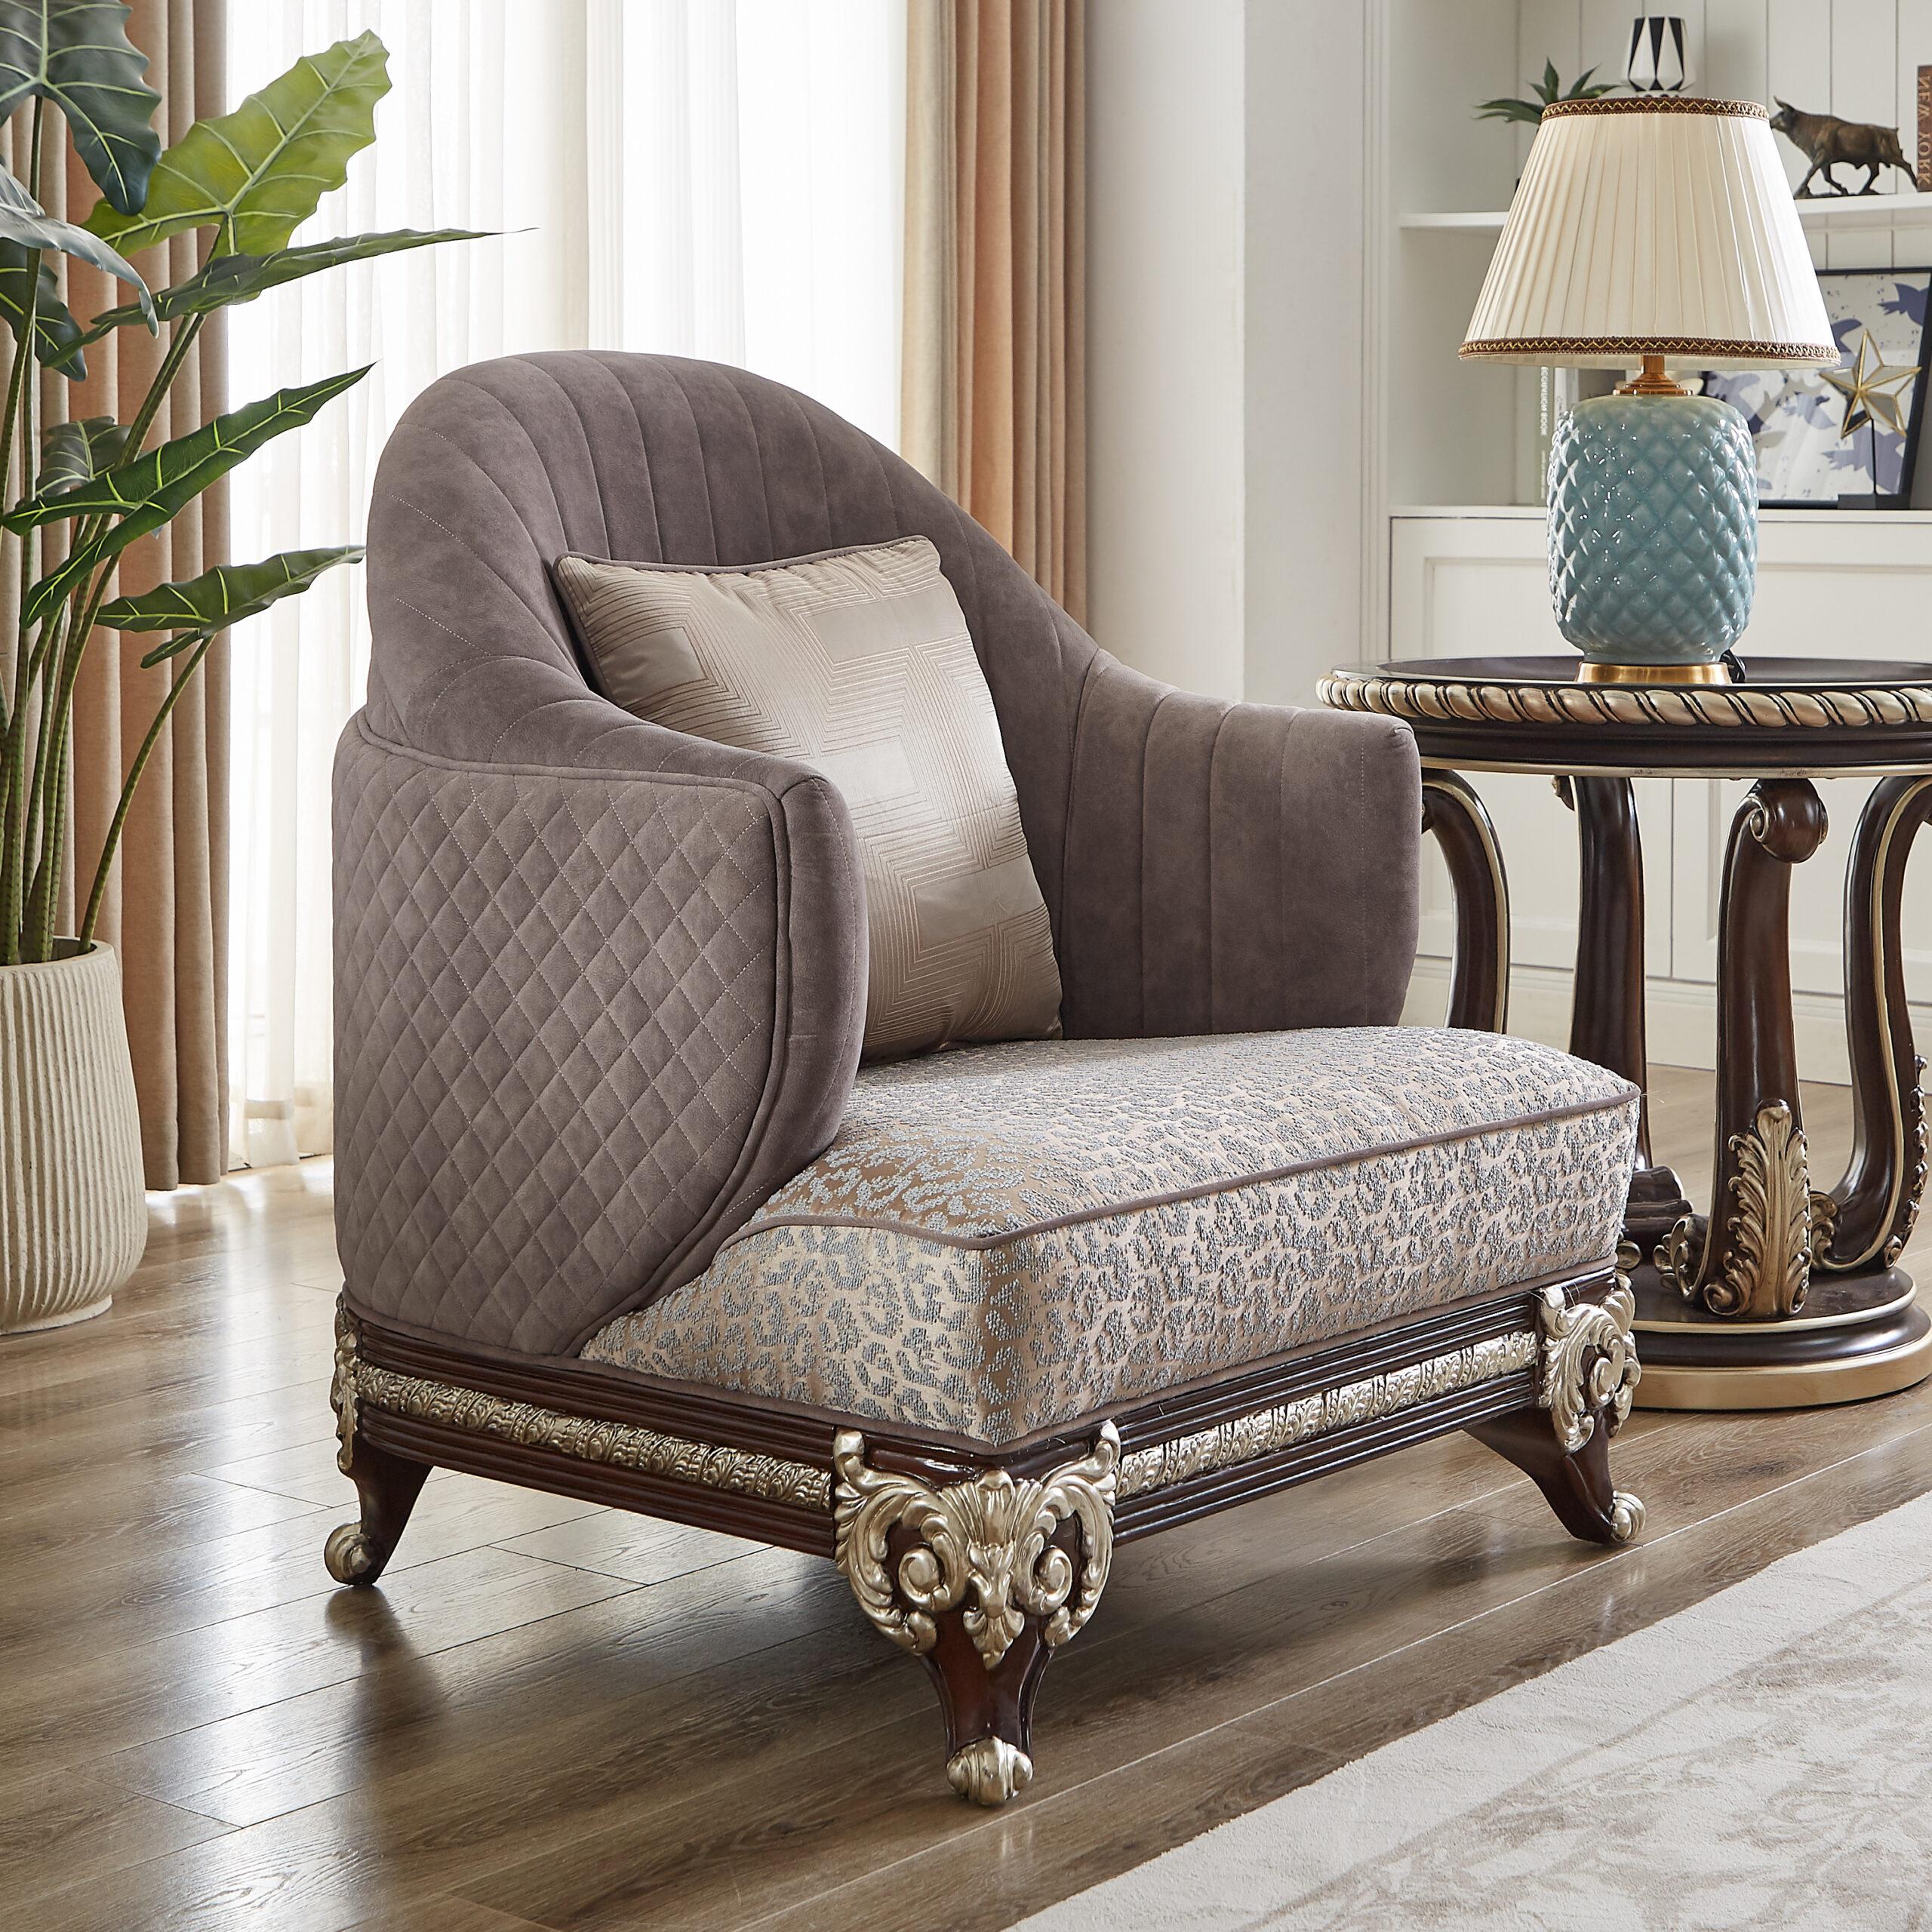 Classic, Traditional Chair HD-9029 Chair HD-C9029 HD-C9029 in Gray, Brown Fabric